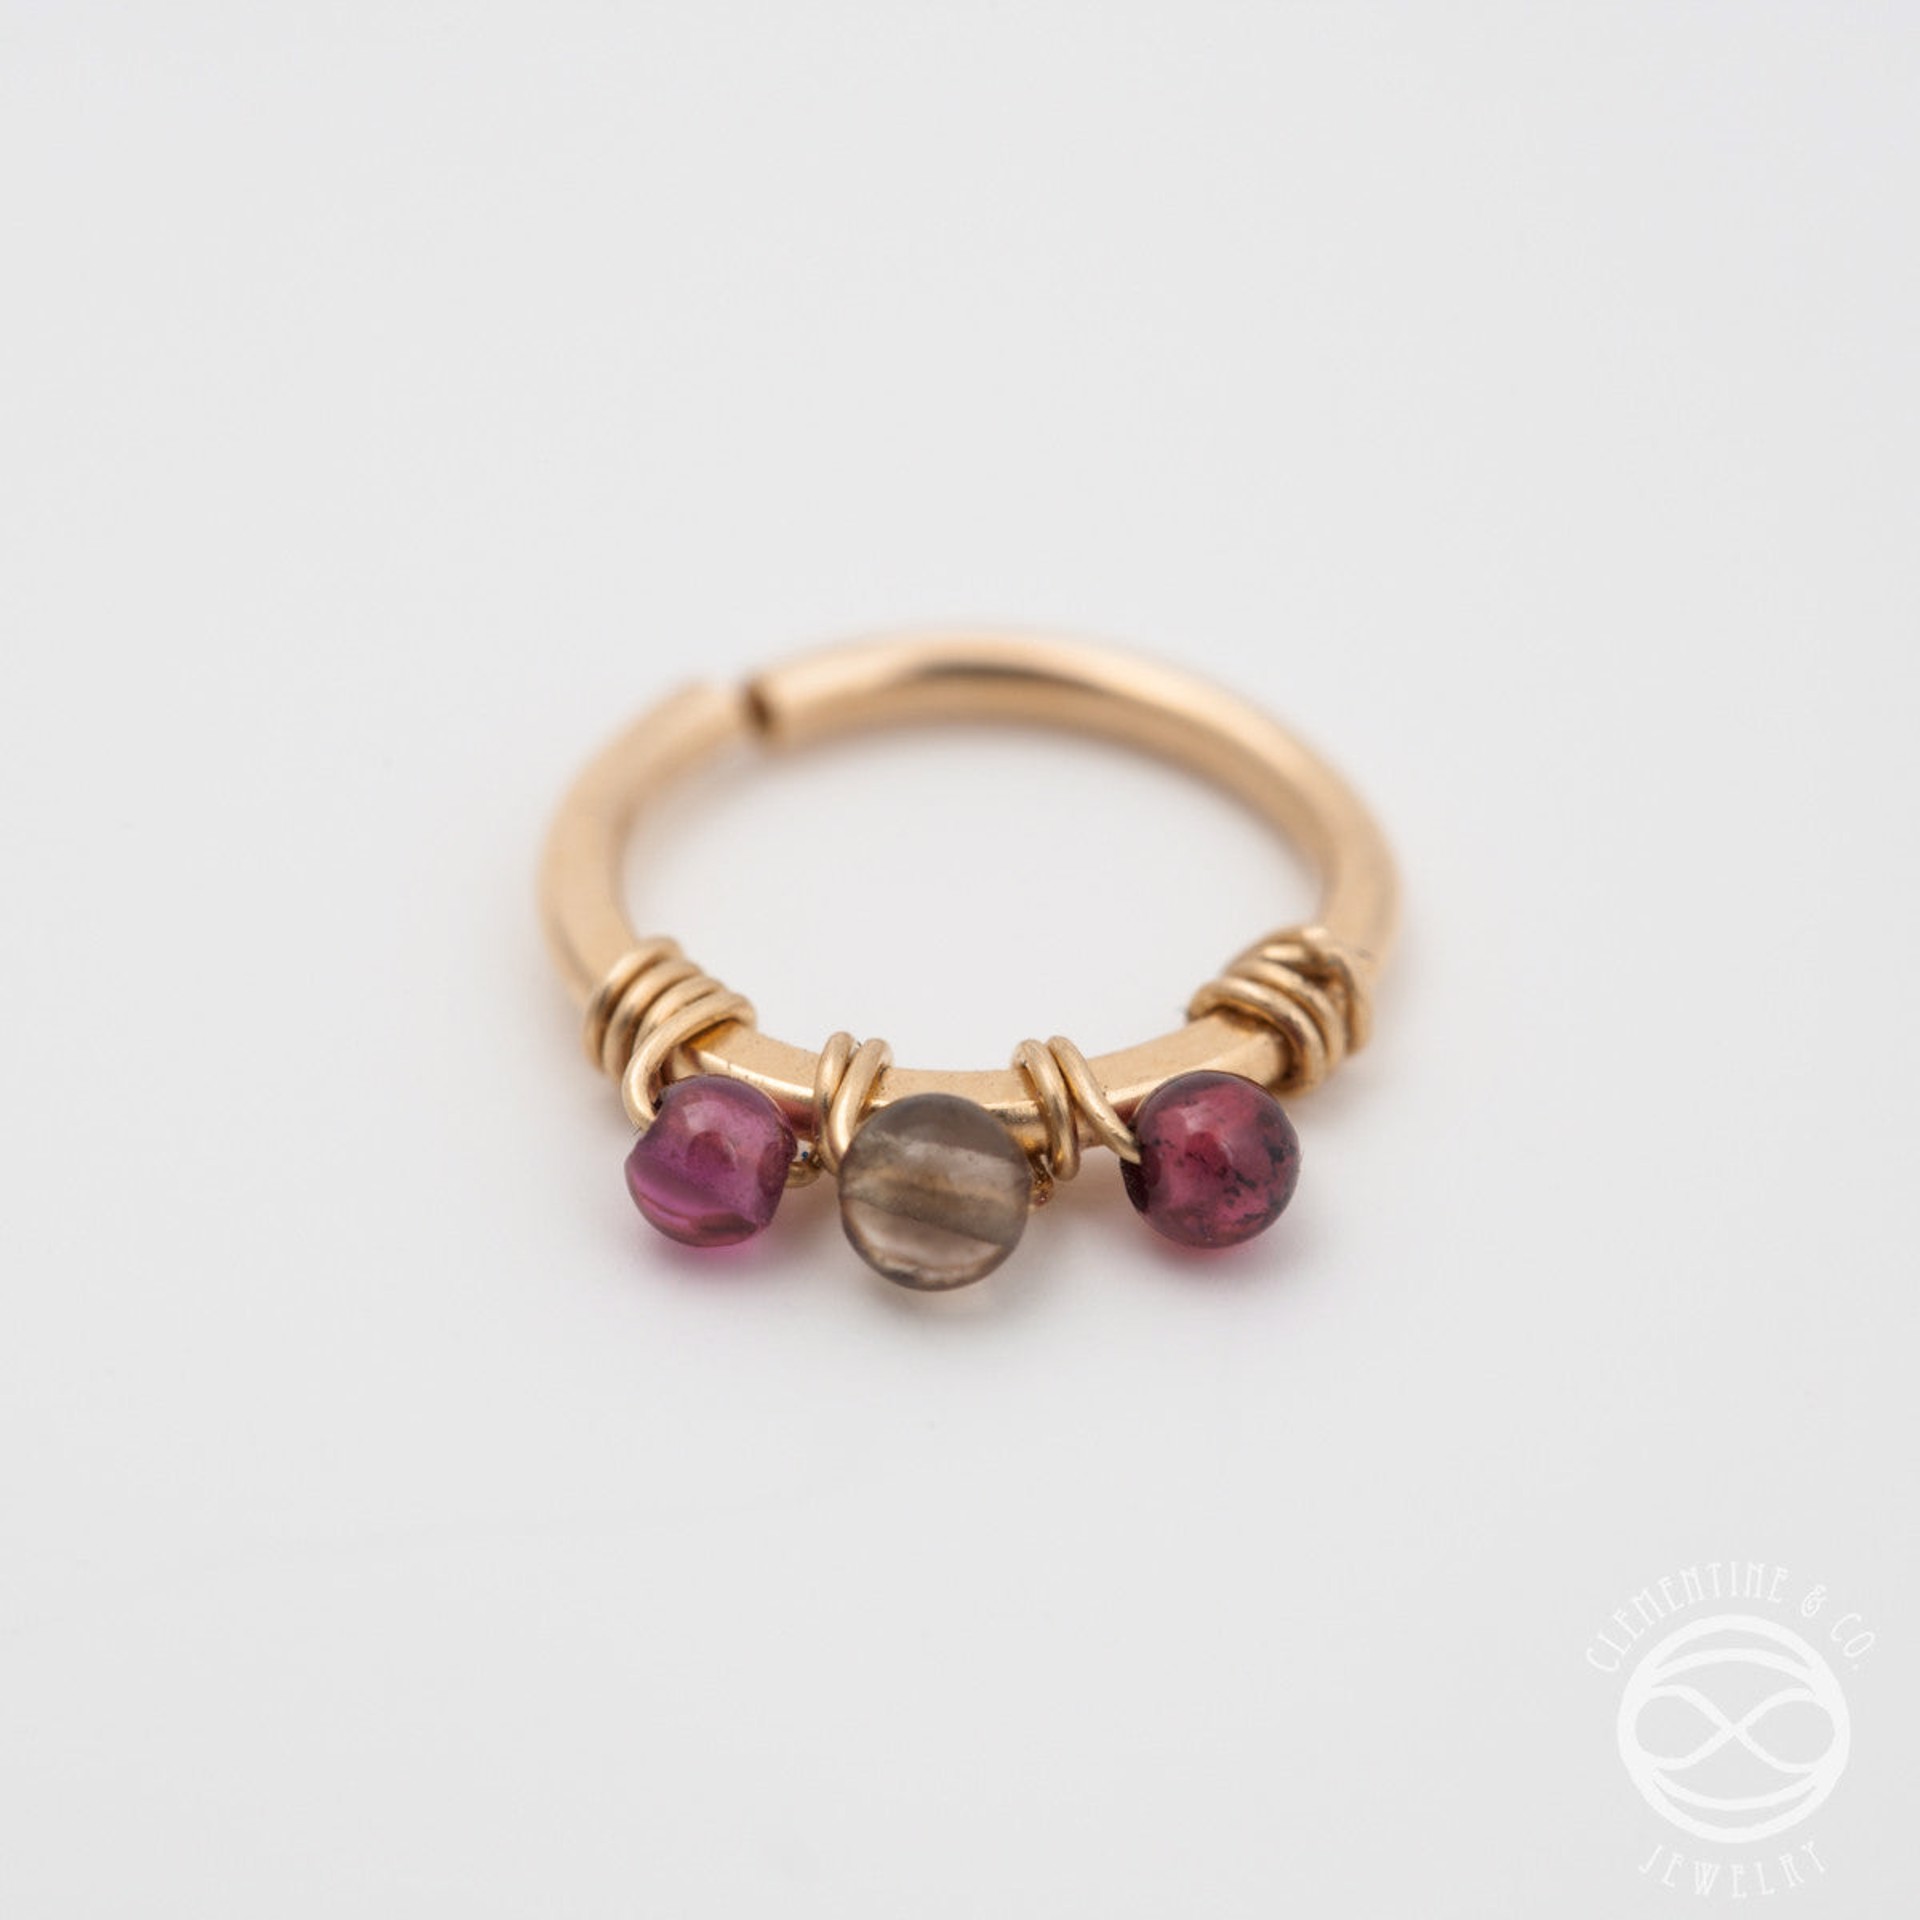 Jeweled Septum Ring in Gold - 8mm by Clementine & Co. Jewelry